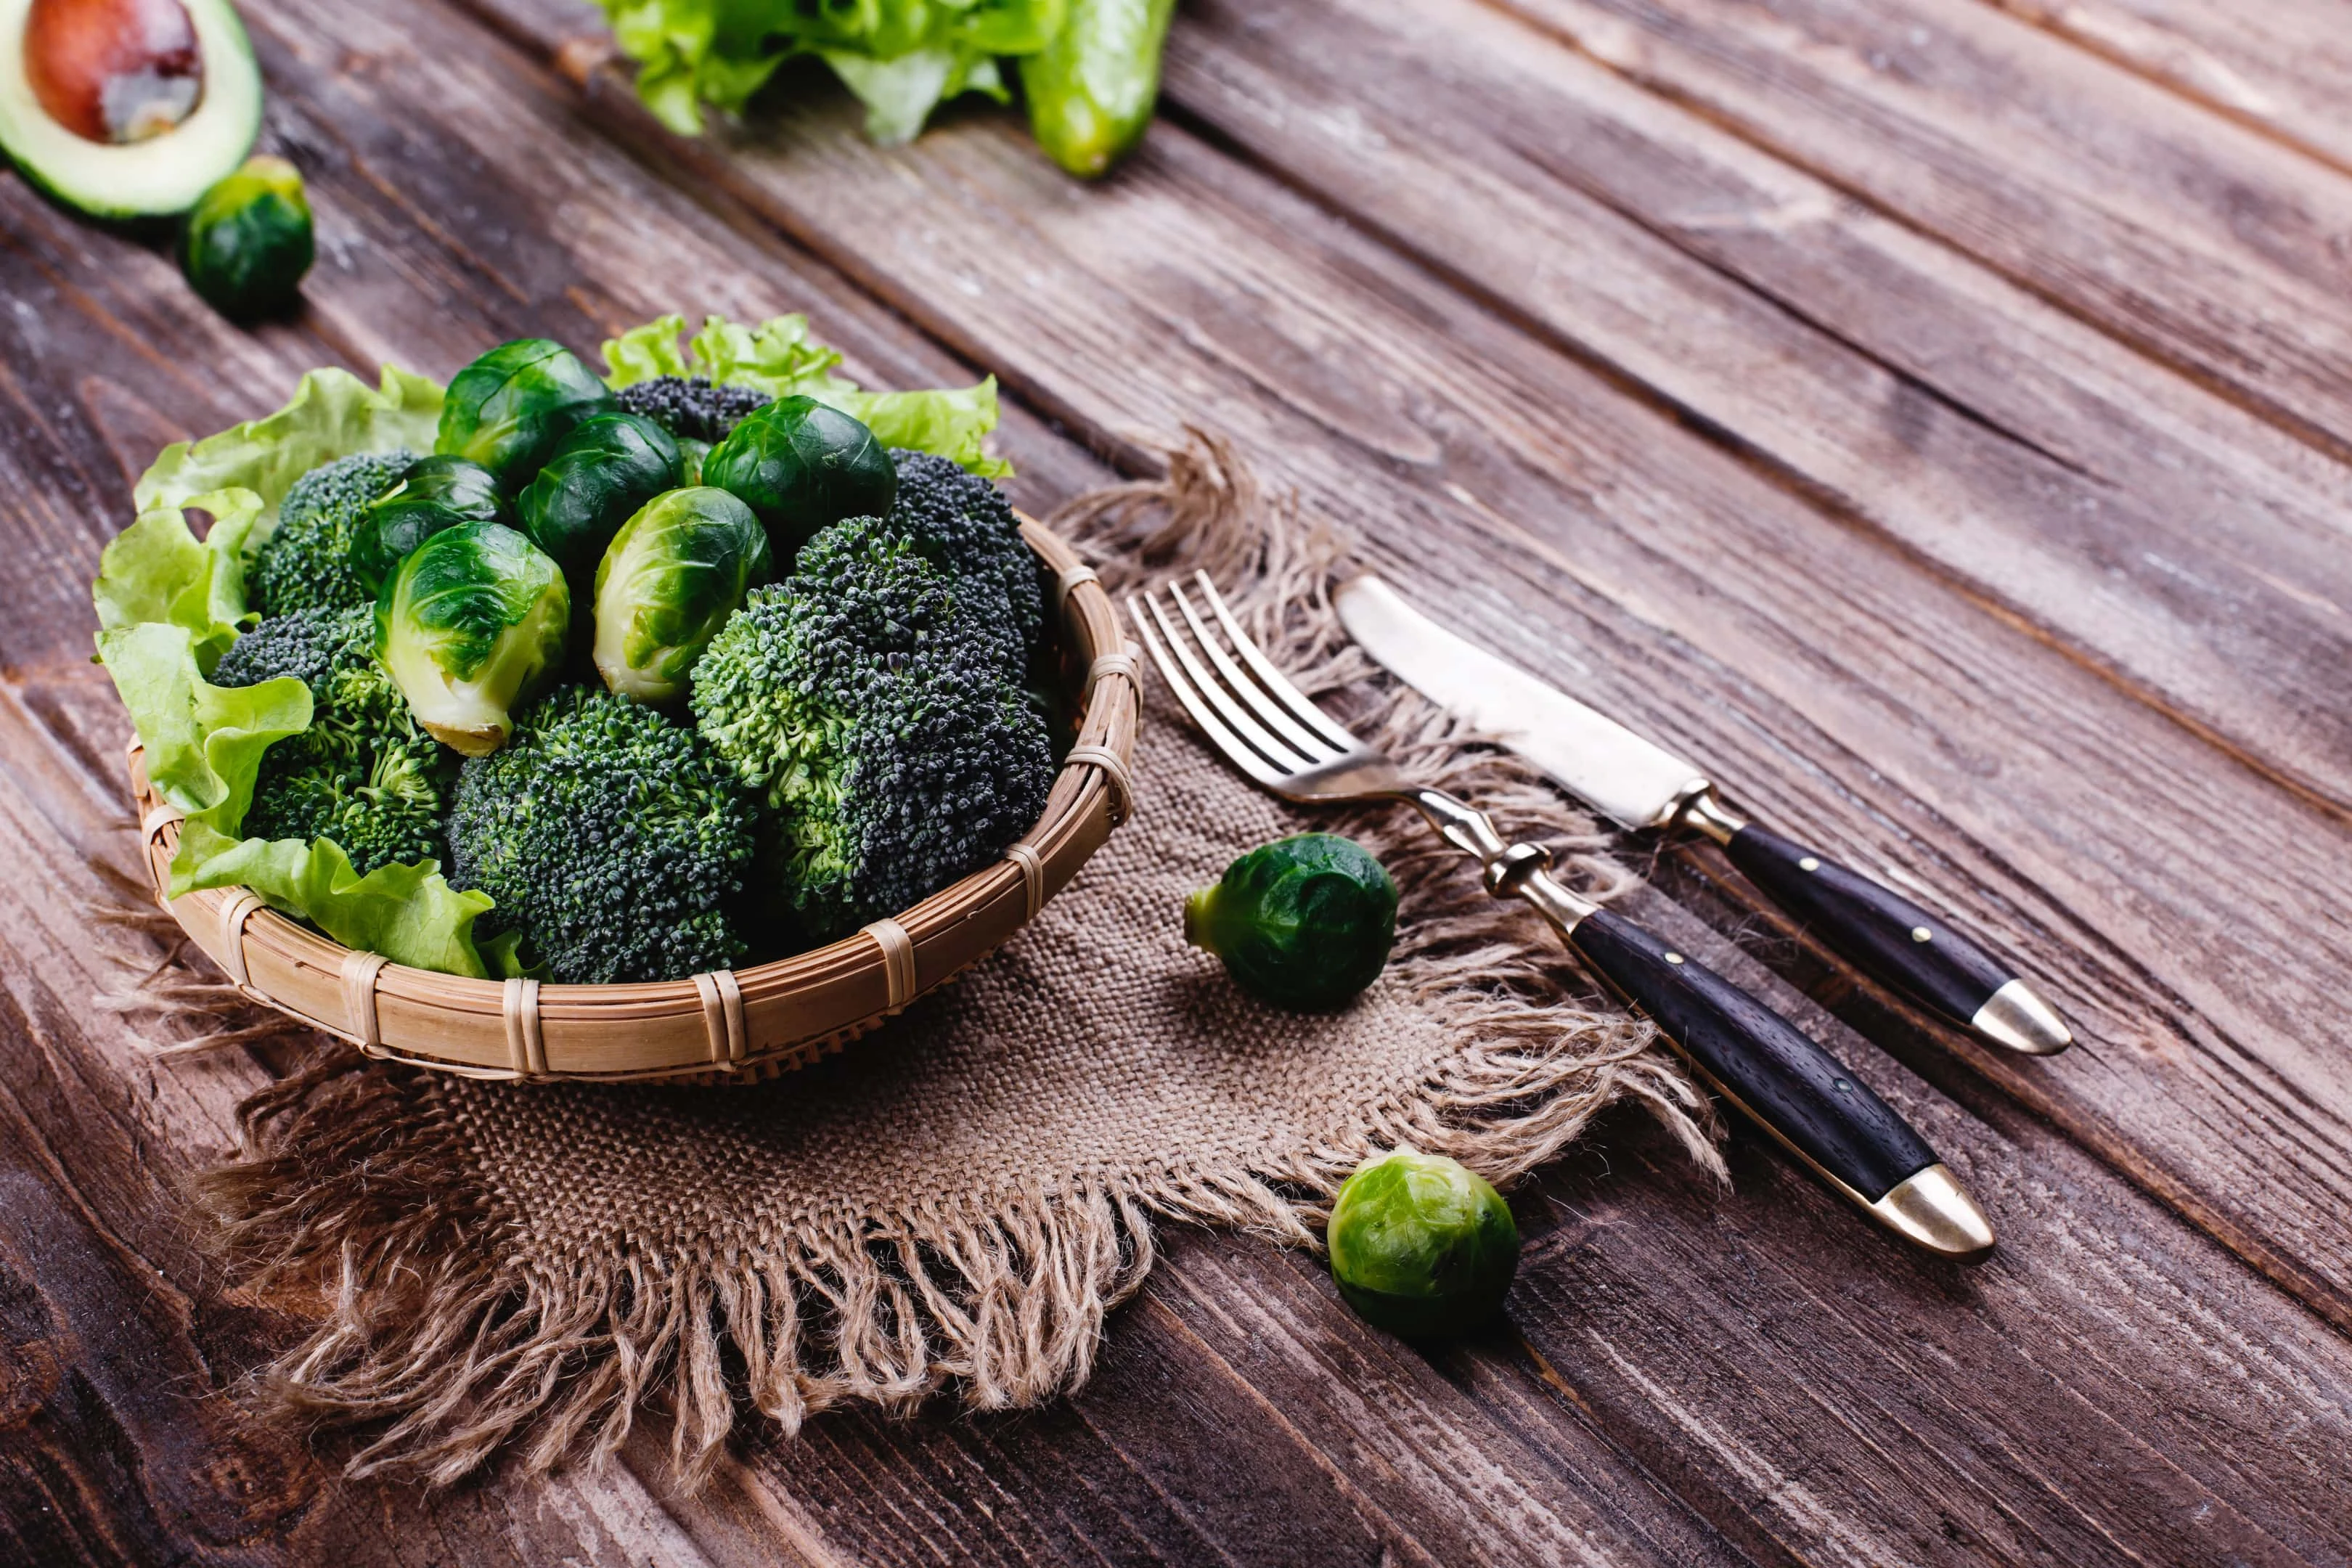 Wooden bowl with broccoli and brussel sprou